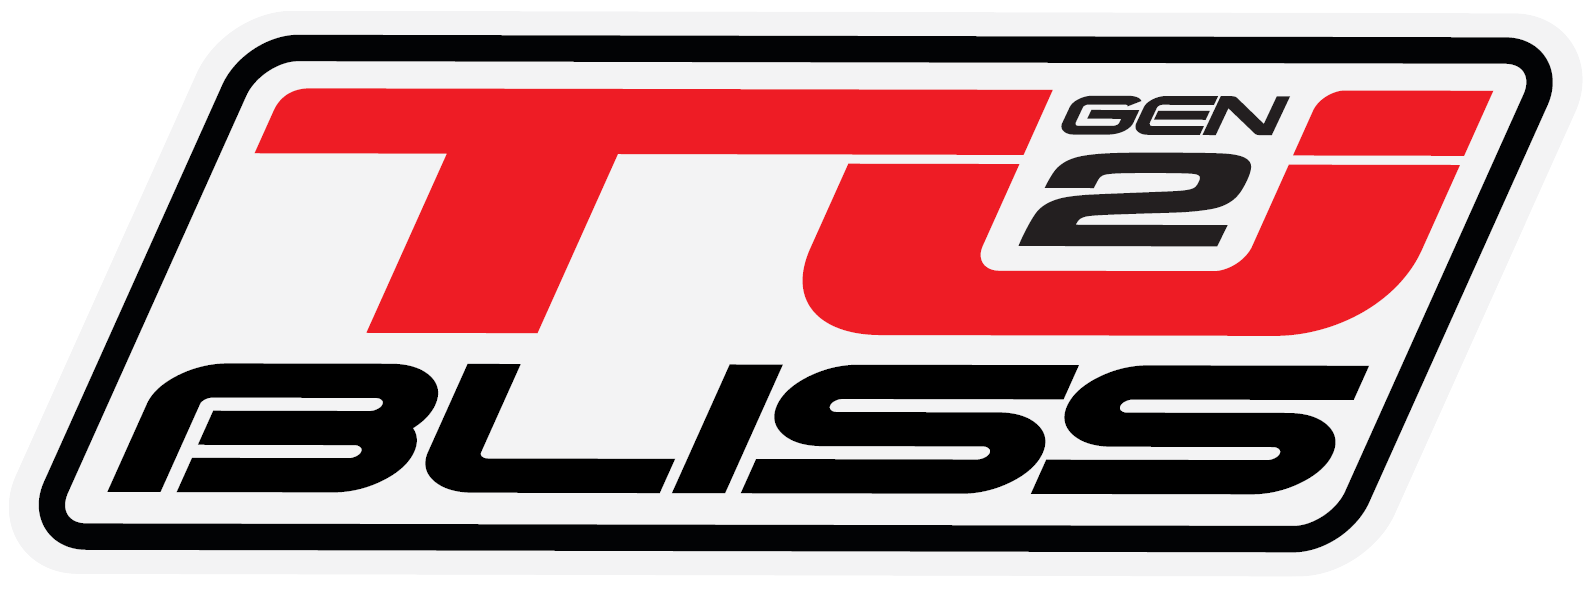 Tubliss-logo01-1587x591.png